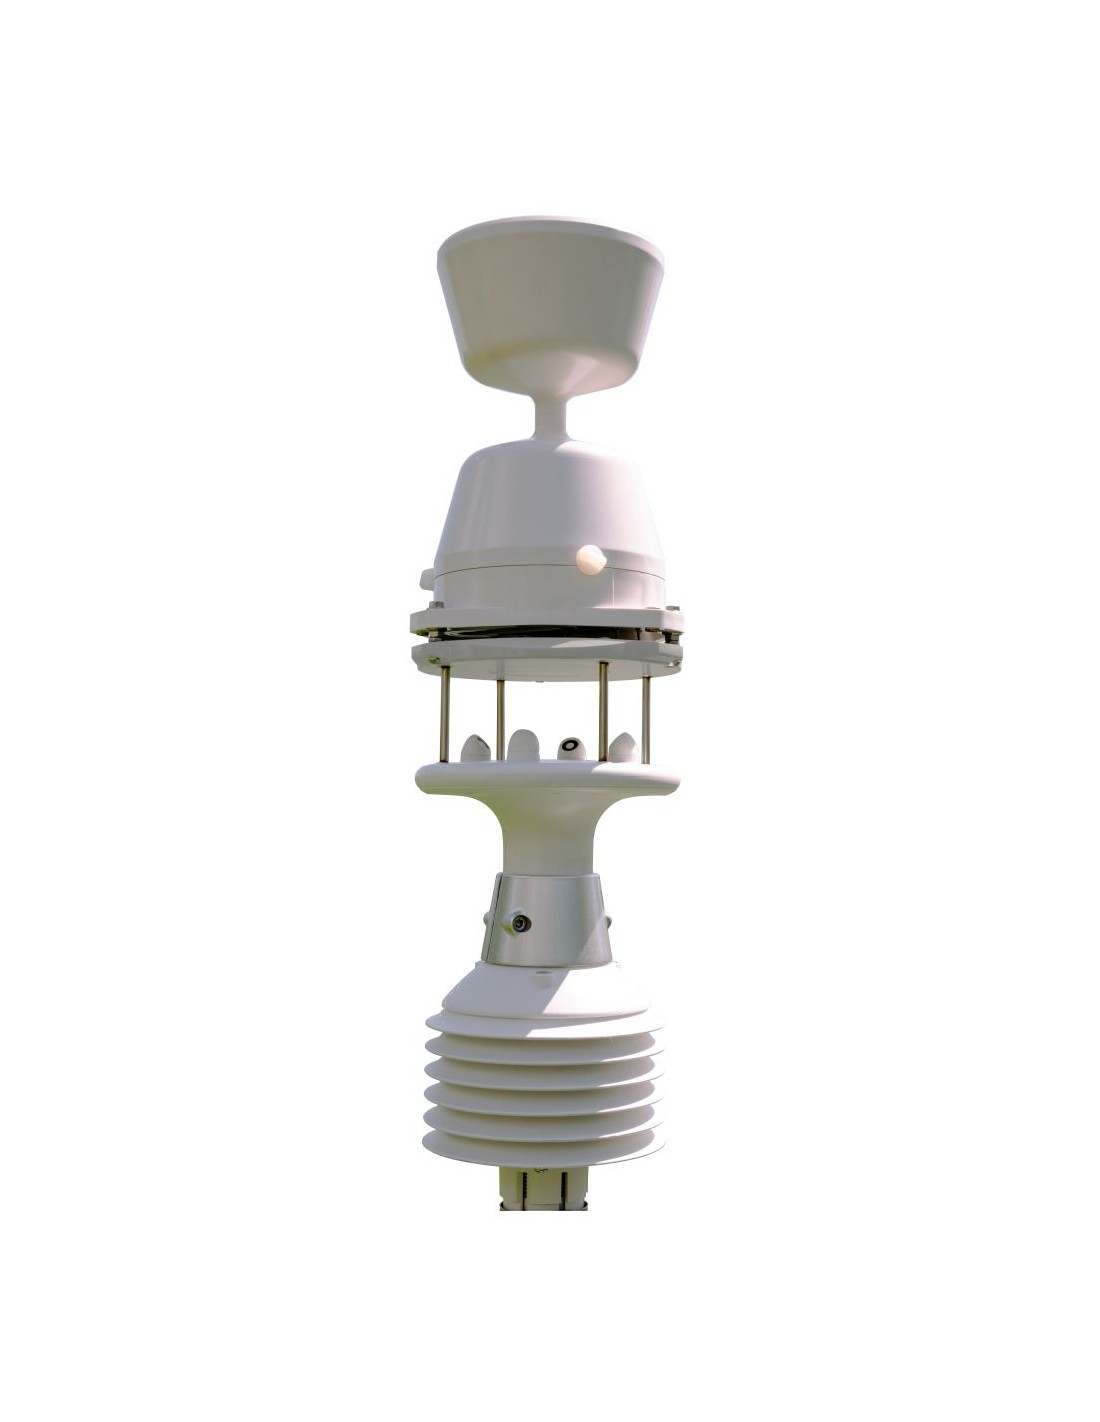 HD52.3D Serie – 2 Axis Ultrasonic Anemometer